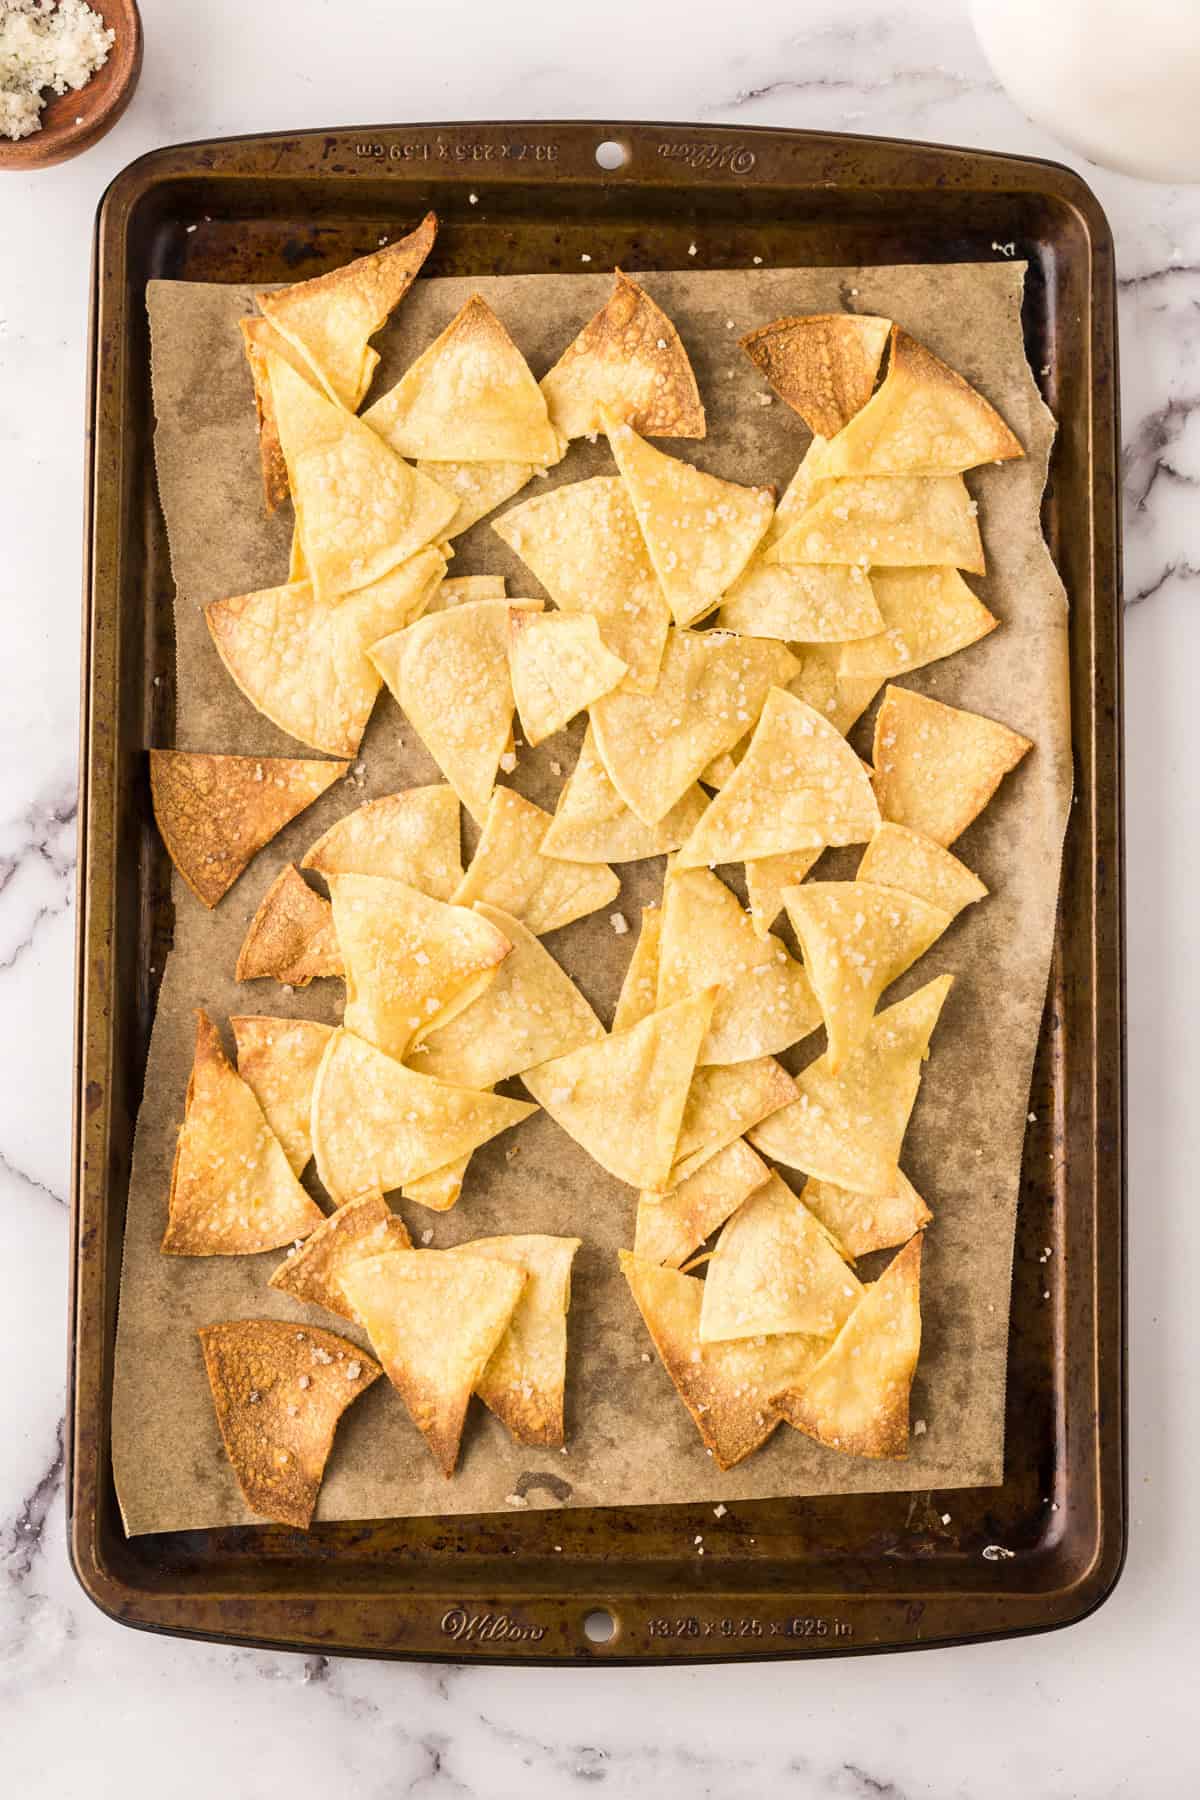 a sheet cake with baked tortilla chips fresh out of the oven.